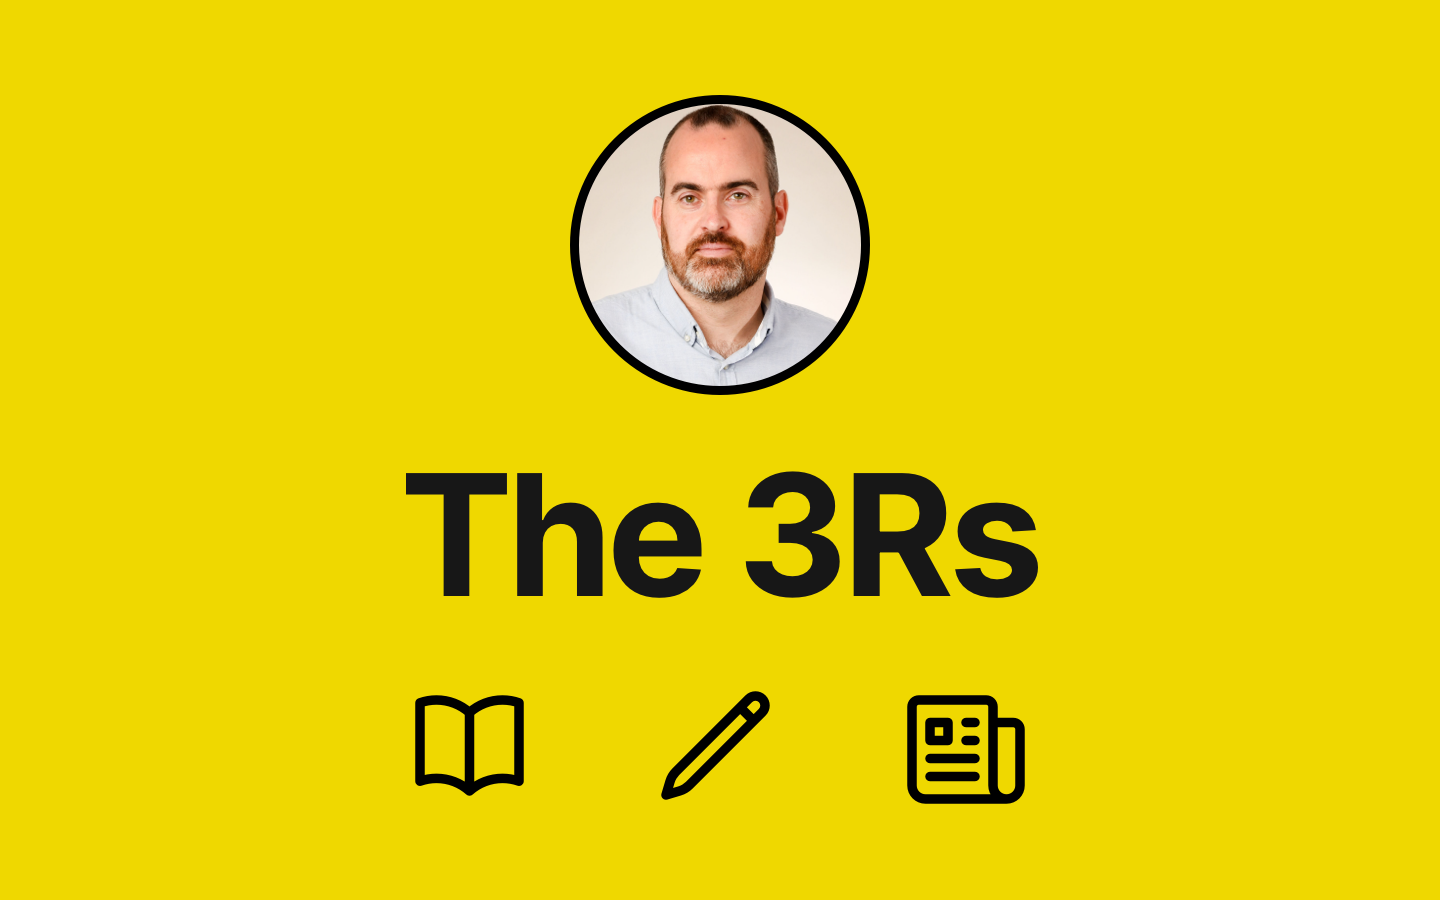 The 3Rs - What I'm reading, w[r]iting, and research I'm interested in #12 feature image